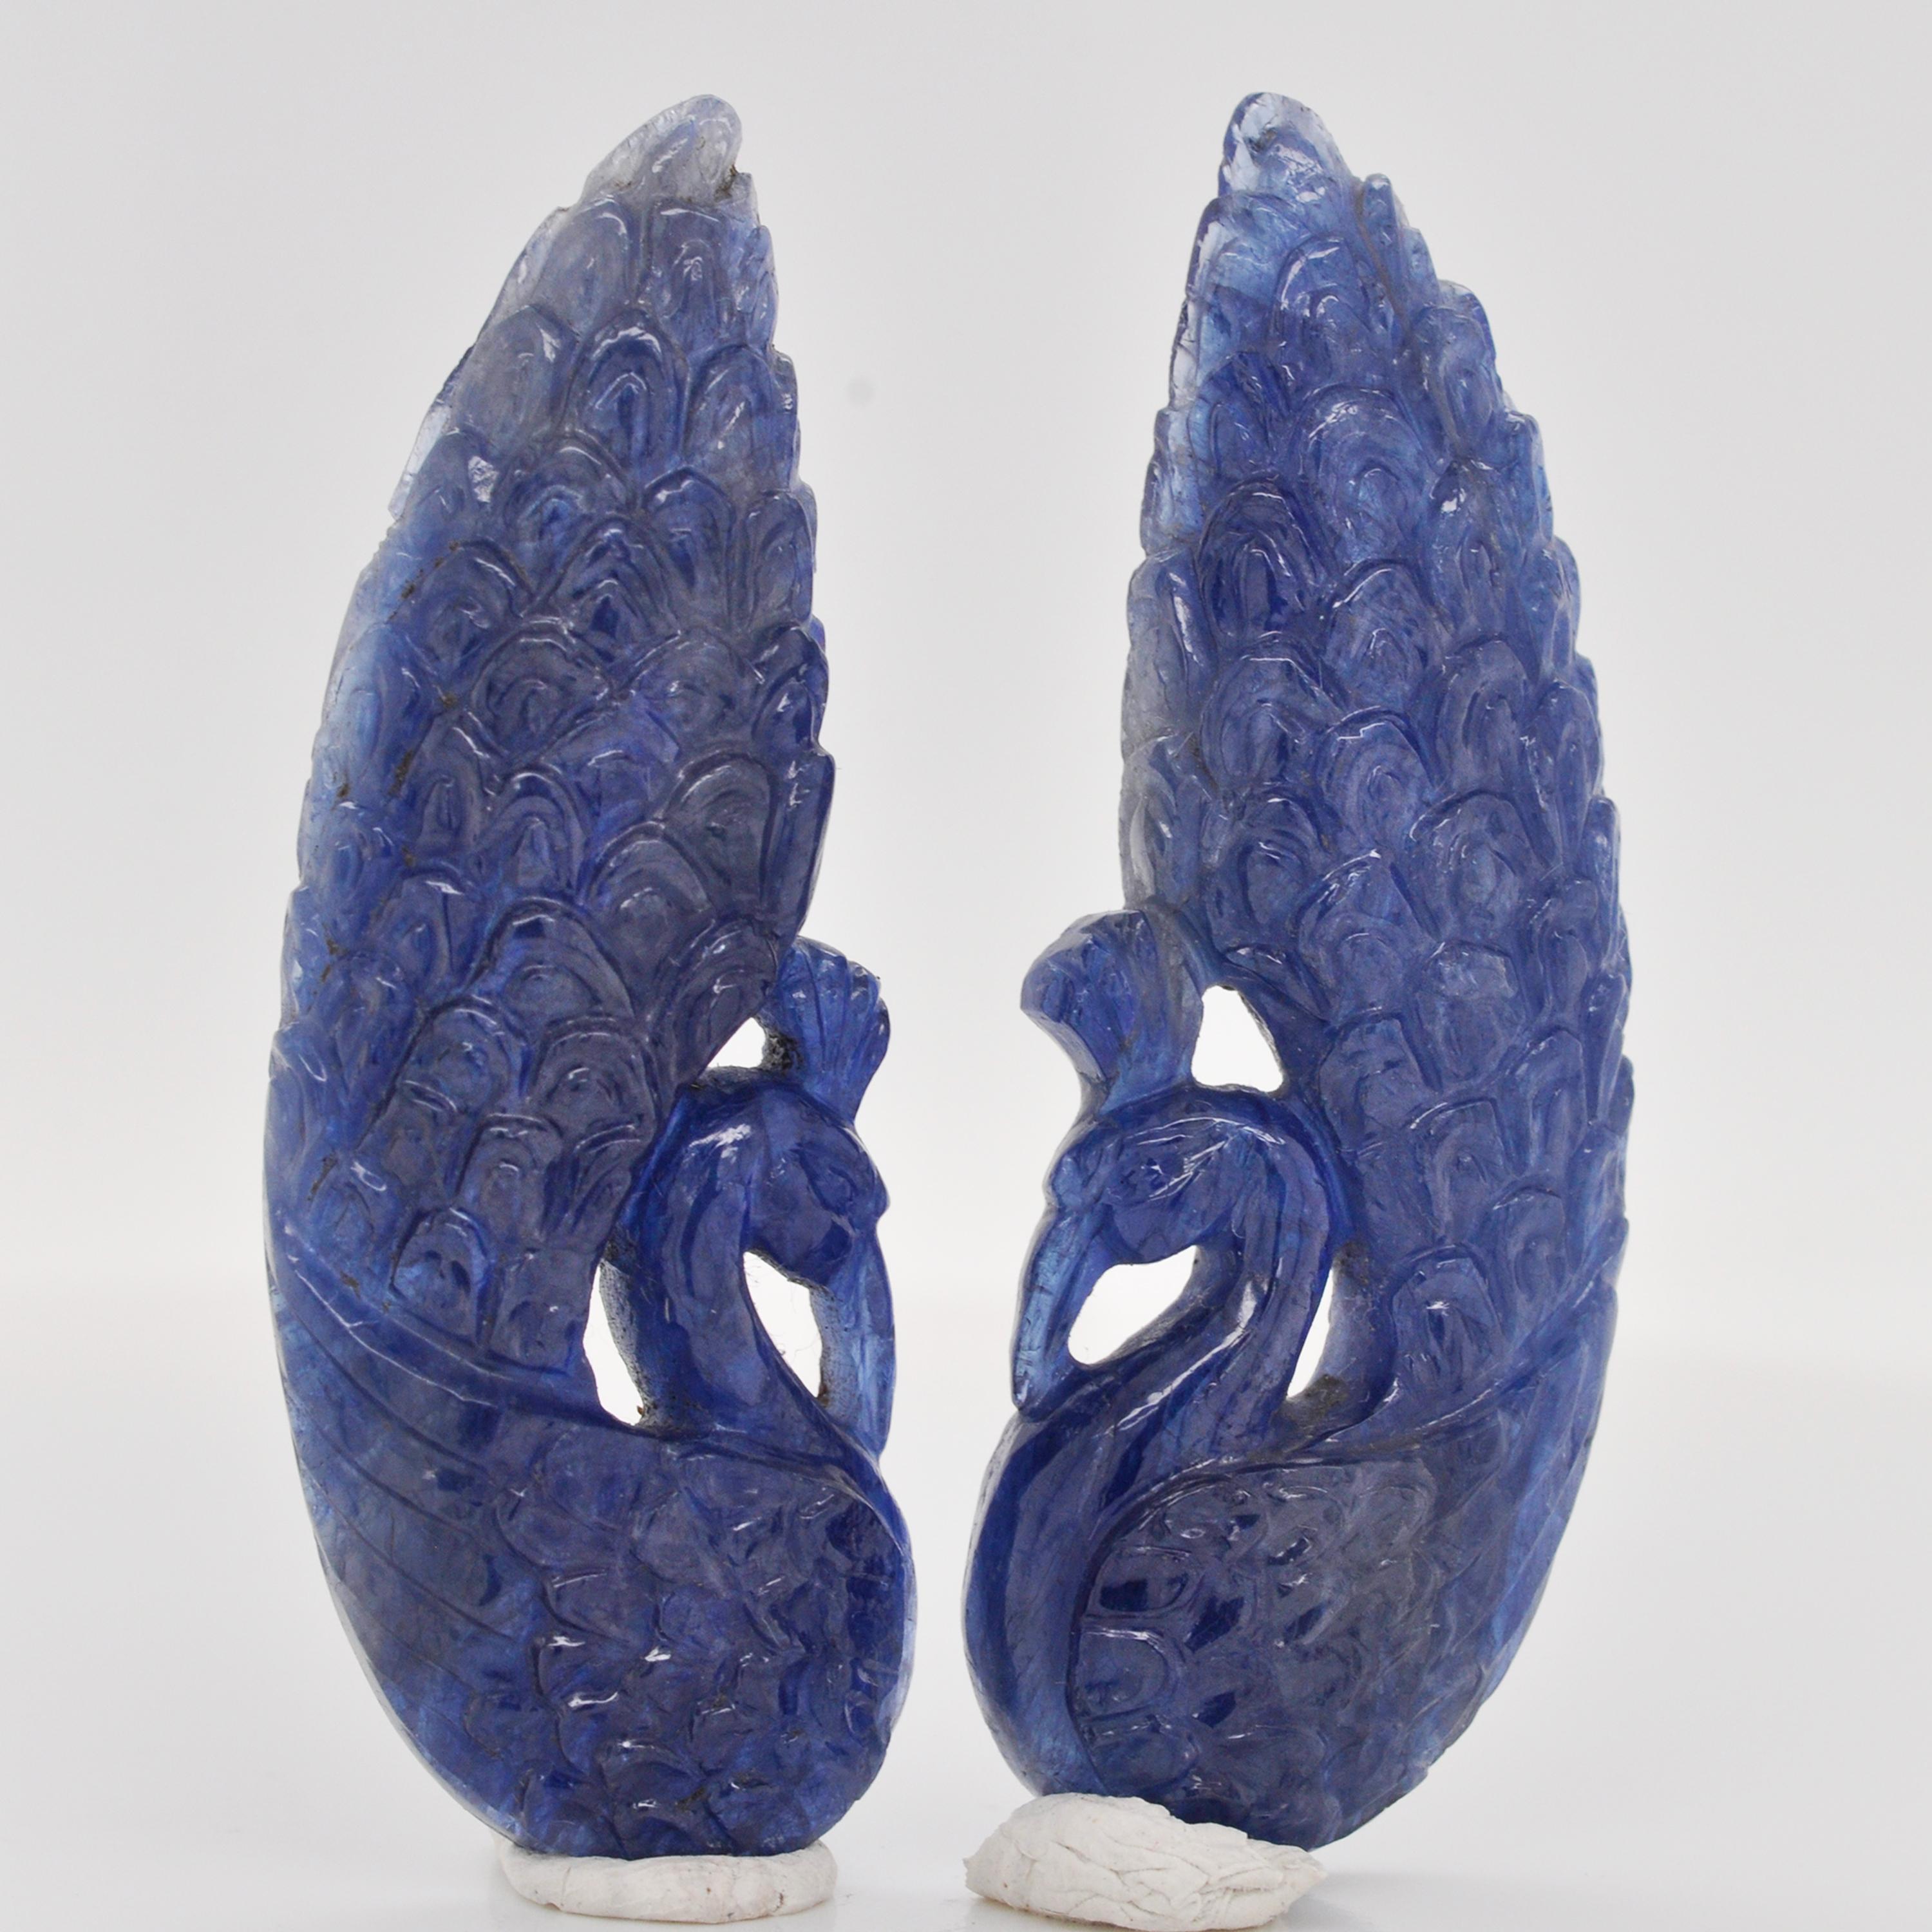 75.93 carats natural blue sapphire hand-carved peacock loose gemstone carvings for dangling earrings.

This pair of peacock carving on natural blue sapphire is hand-carved by our expert lapidary artist in jaipur which transforms raw stones into